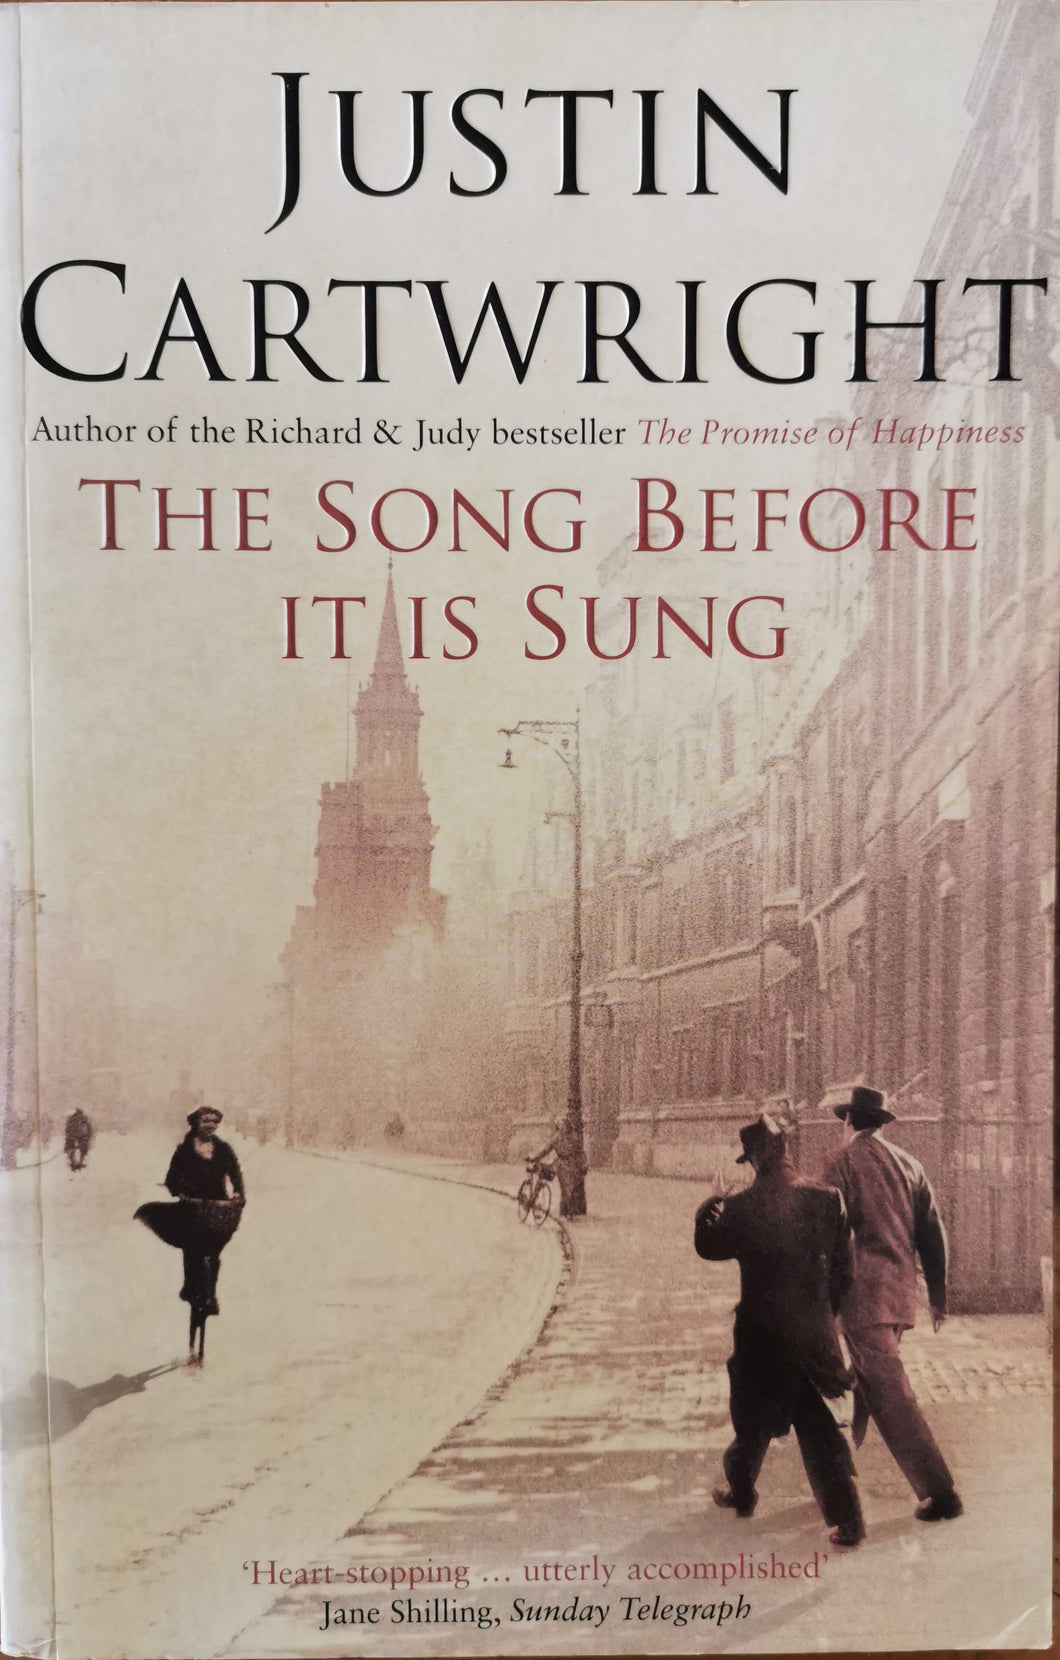 Justin Cartwright - The Song before it is Sung